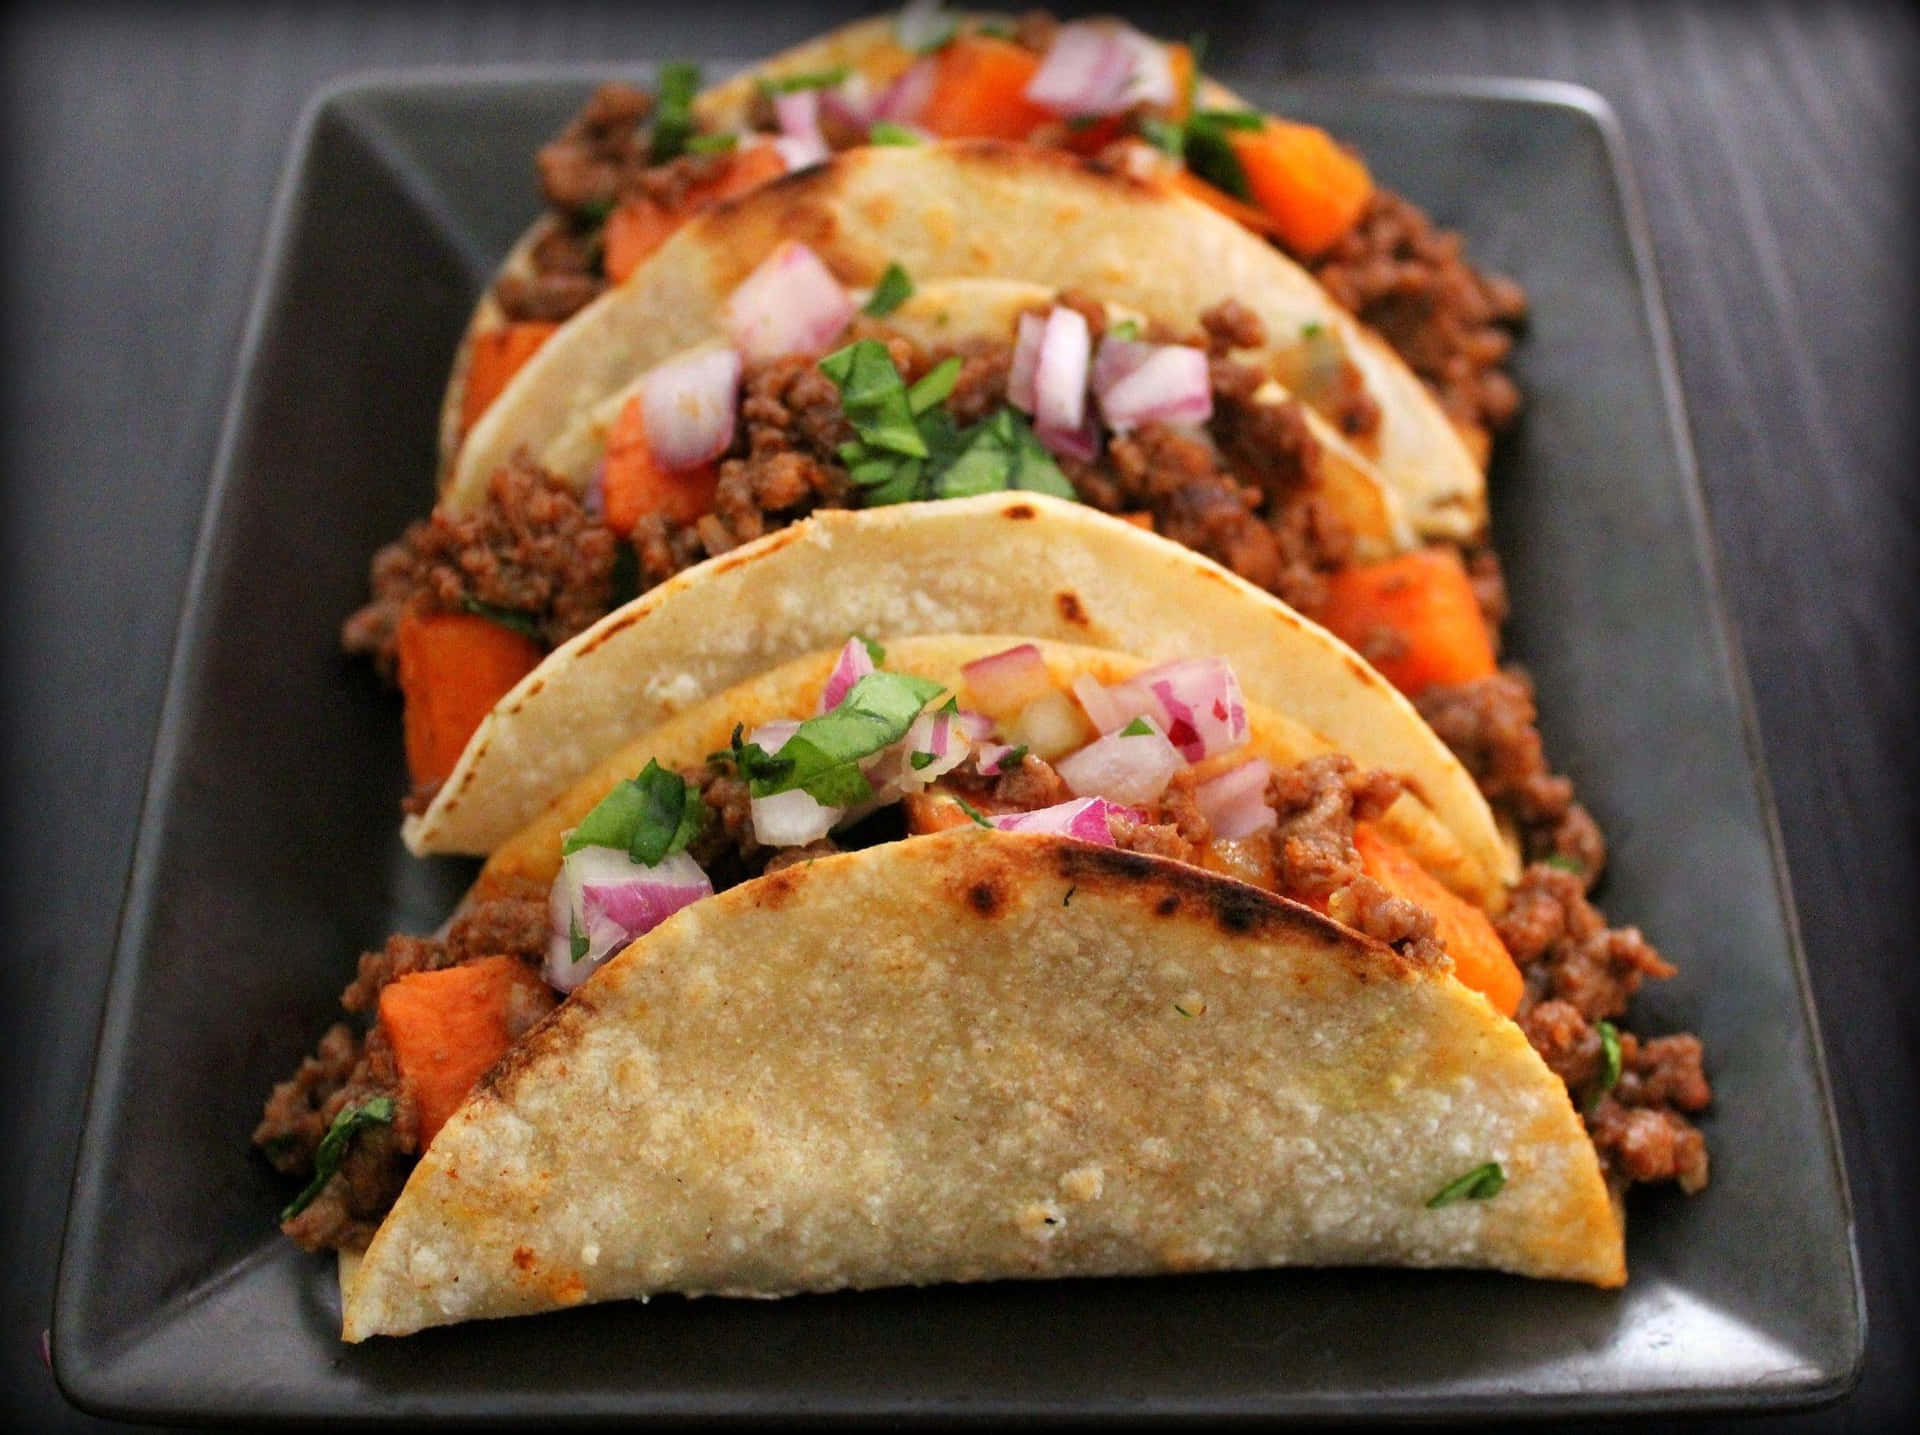 Delicious plate of tacos